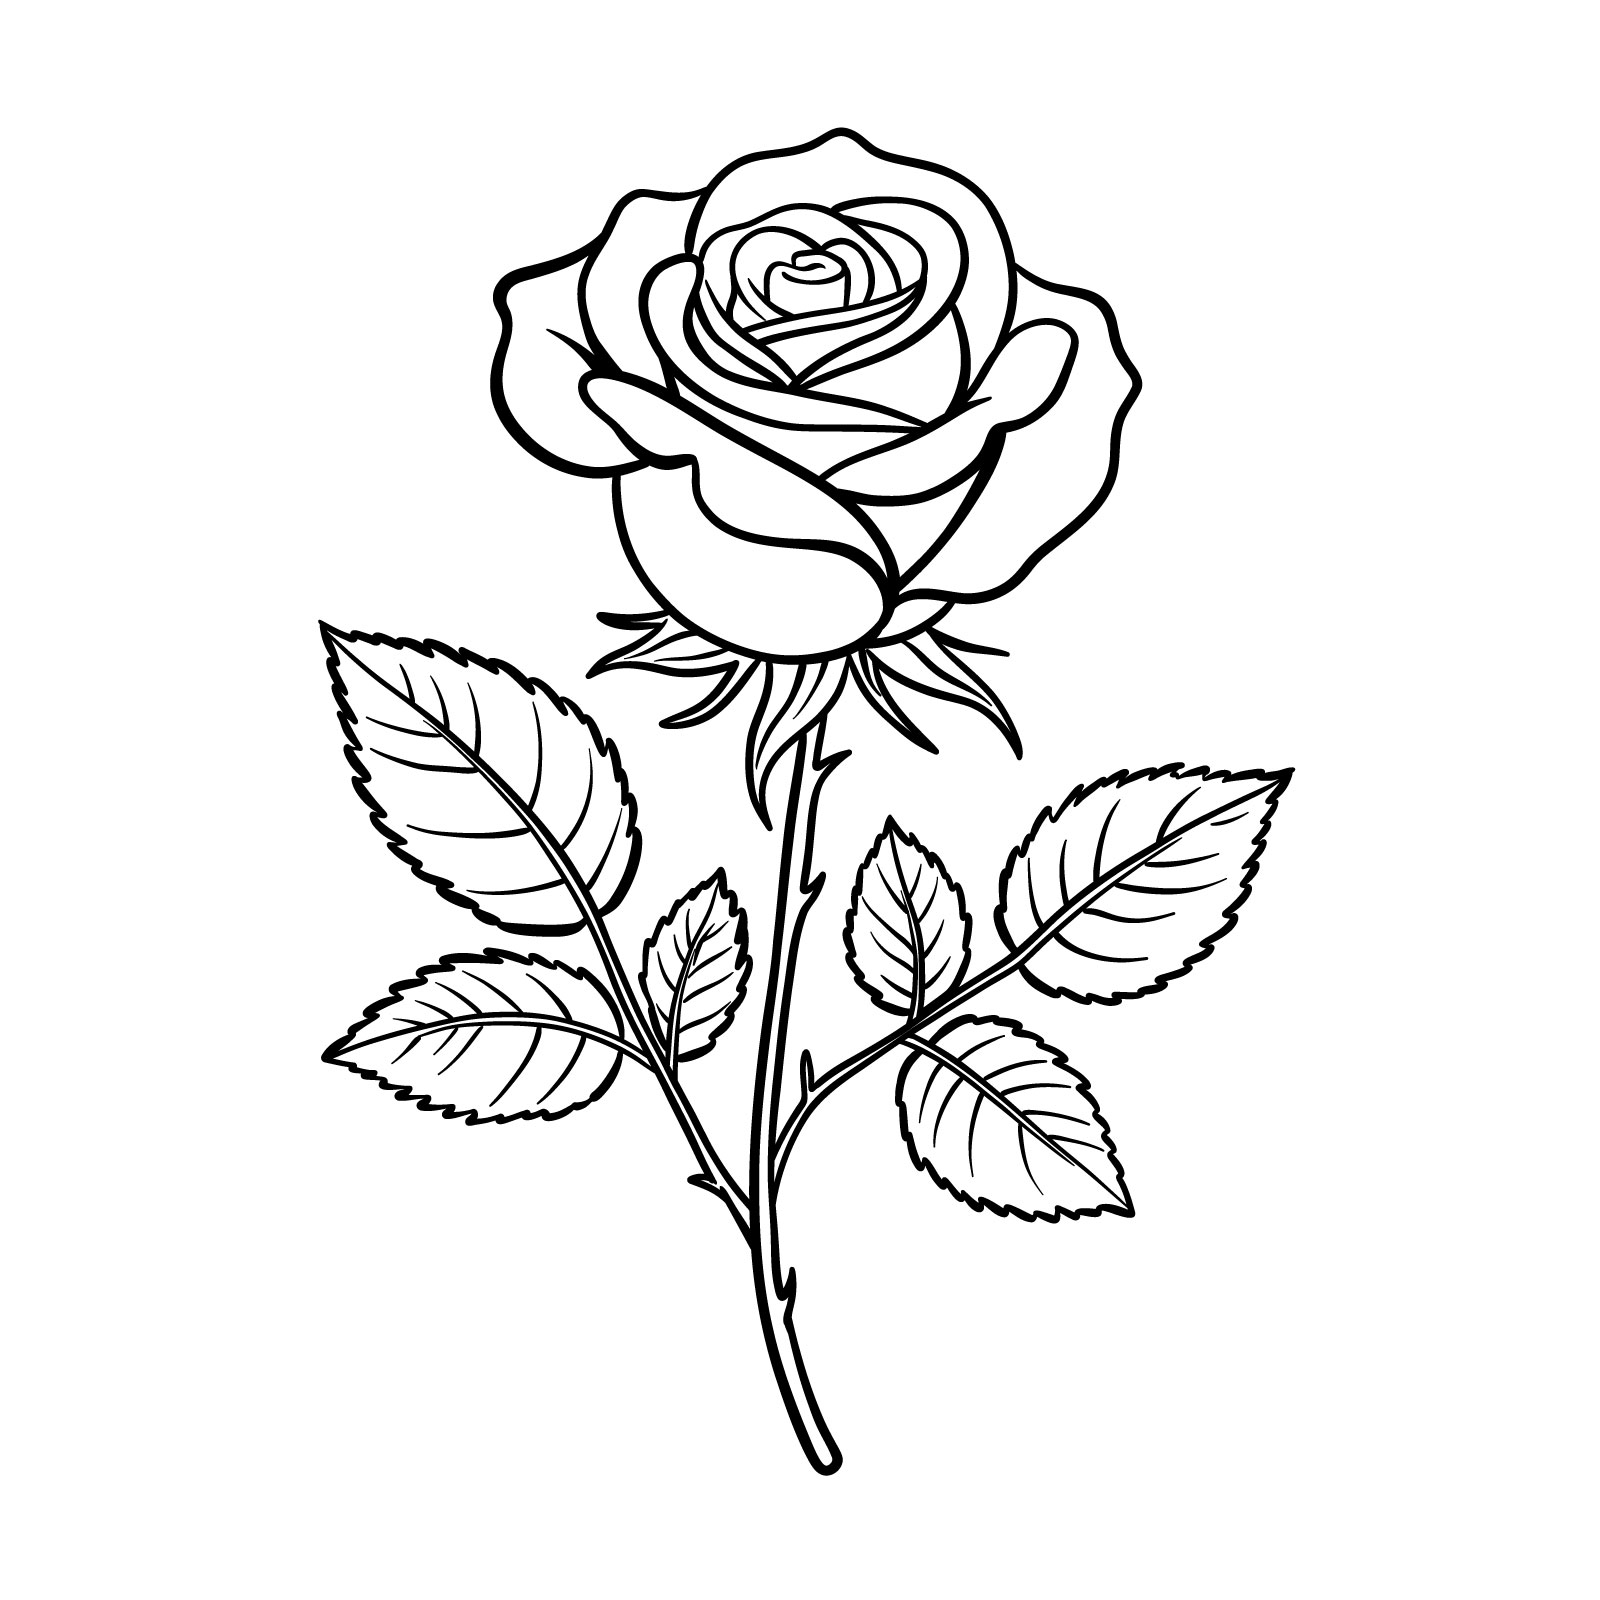 How to draw Rose Flower | ART LOVERS HOME